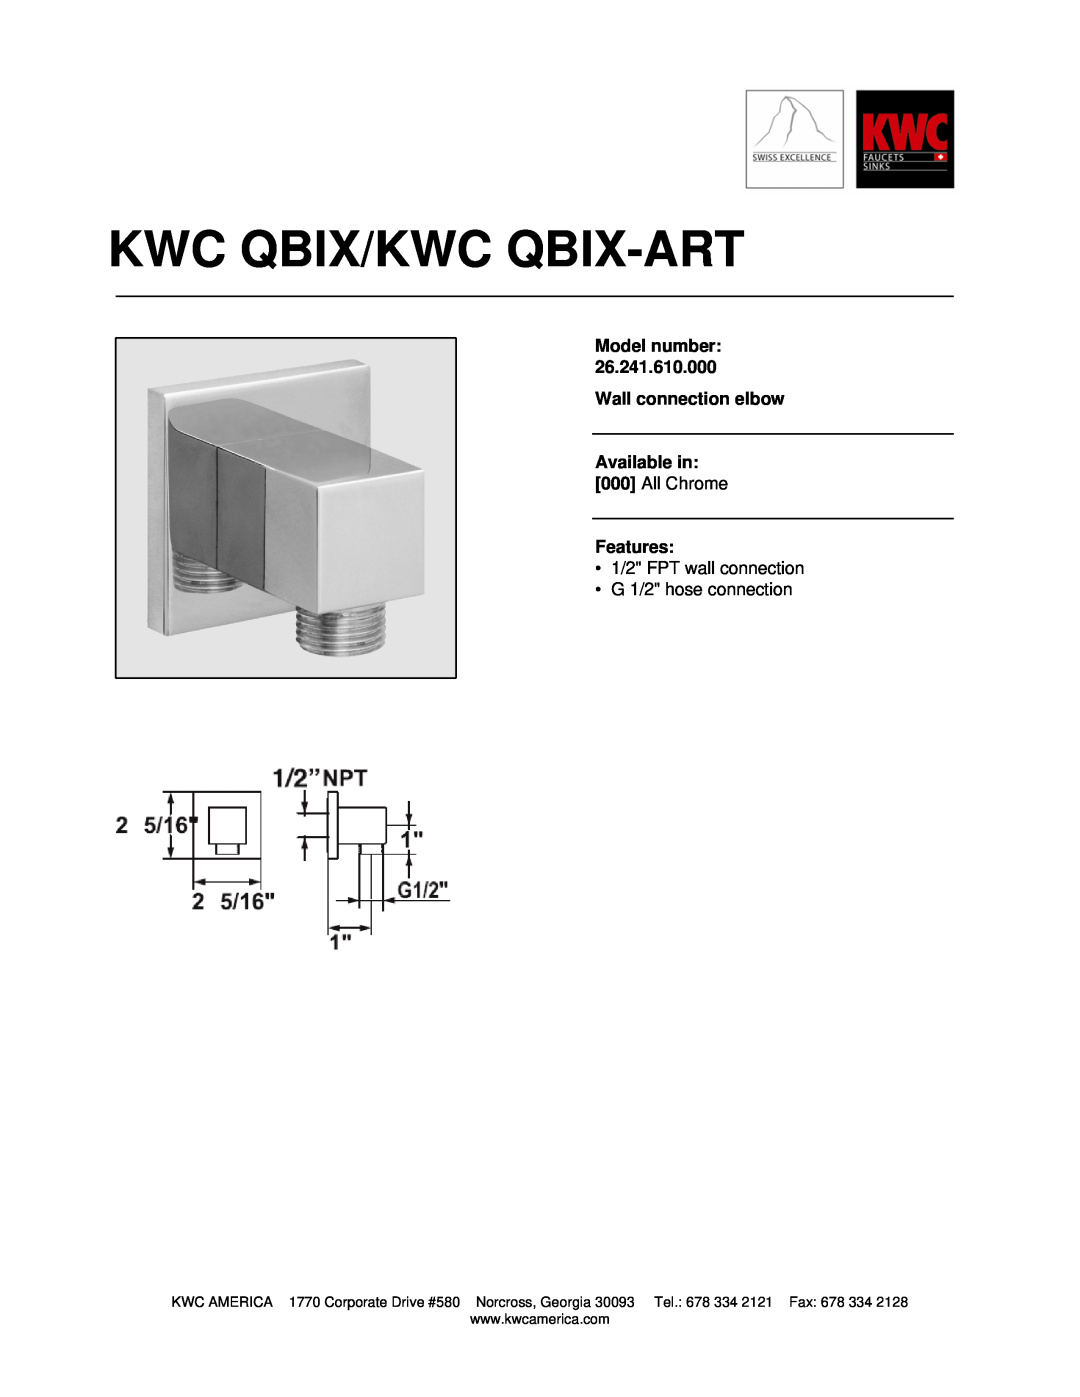 KWC 26.241.610.000 manual Kwc Qbix/Kwc Qbix-Art, Model number Wall connection elbow, Available in 000 All Chrome Features 